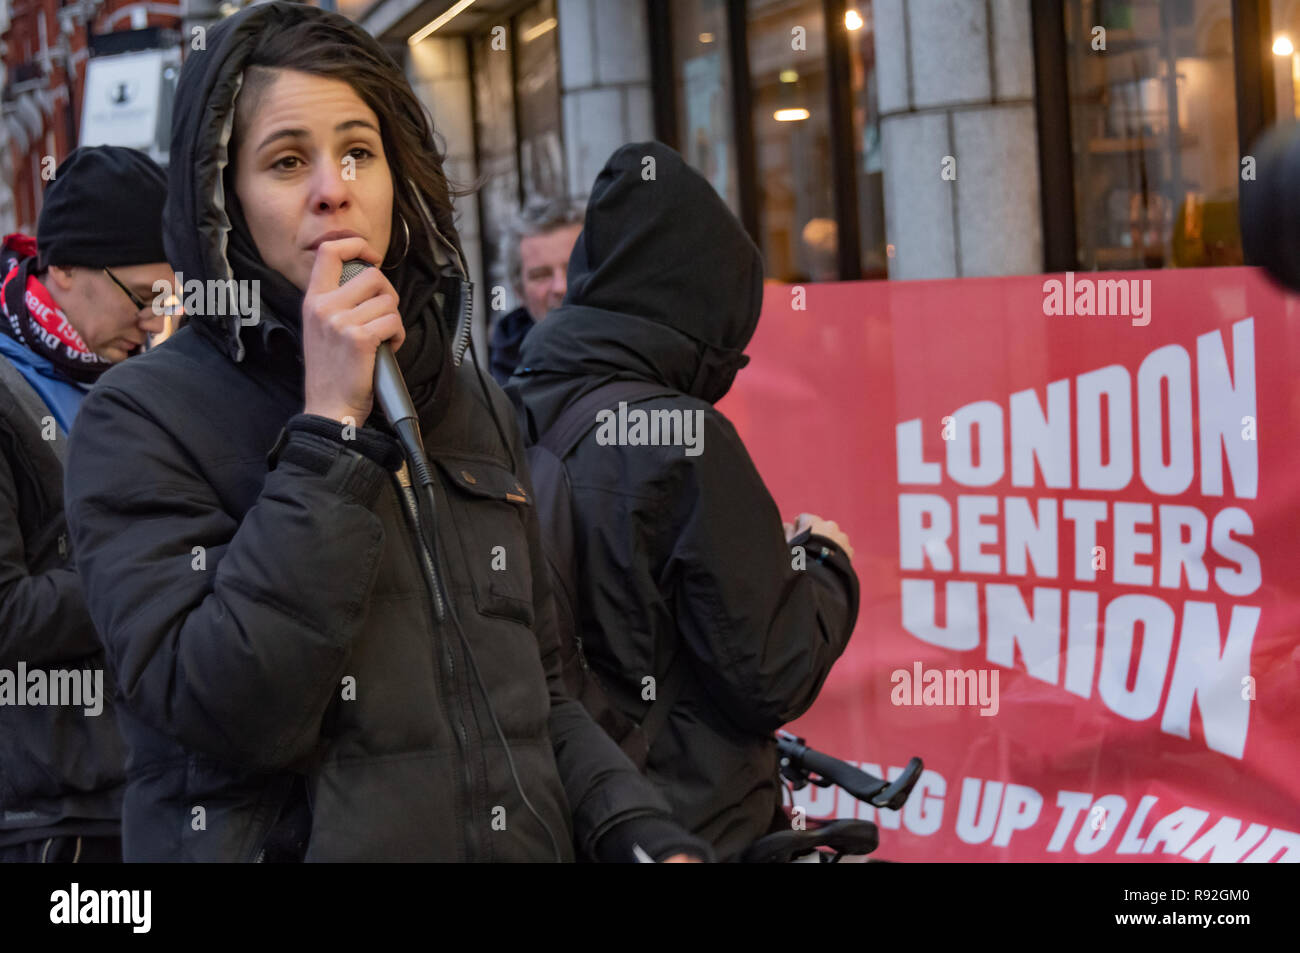 London, UK. 18th December 2018. A speaker from Berlin community centre and pub Syndikat at the protest with London Renters Union outside the London offices of their landlord, Global Real Estate Investors Limited, owned by the secretive Pears brothers, three of the richest men in the UK, who through various 'letterbox' companies own around 6200 properties in Berlin, against notice to quit after being open for 33 years in Berlin-Neukölln. Credit: Peter Marshall/Alamy Live News Stock Photo